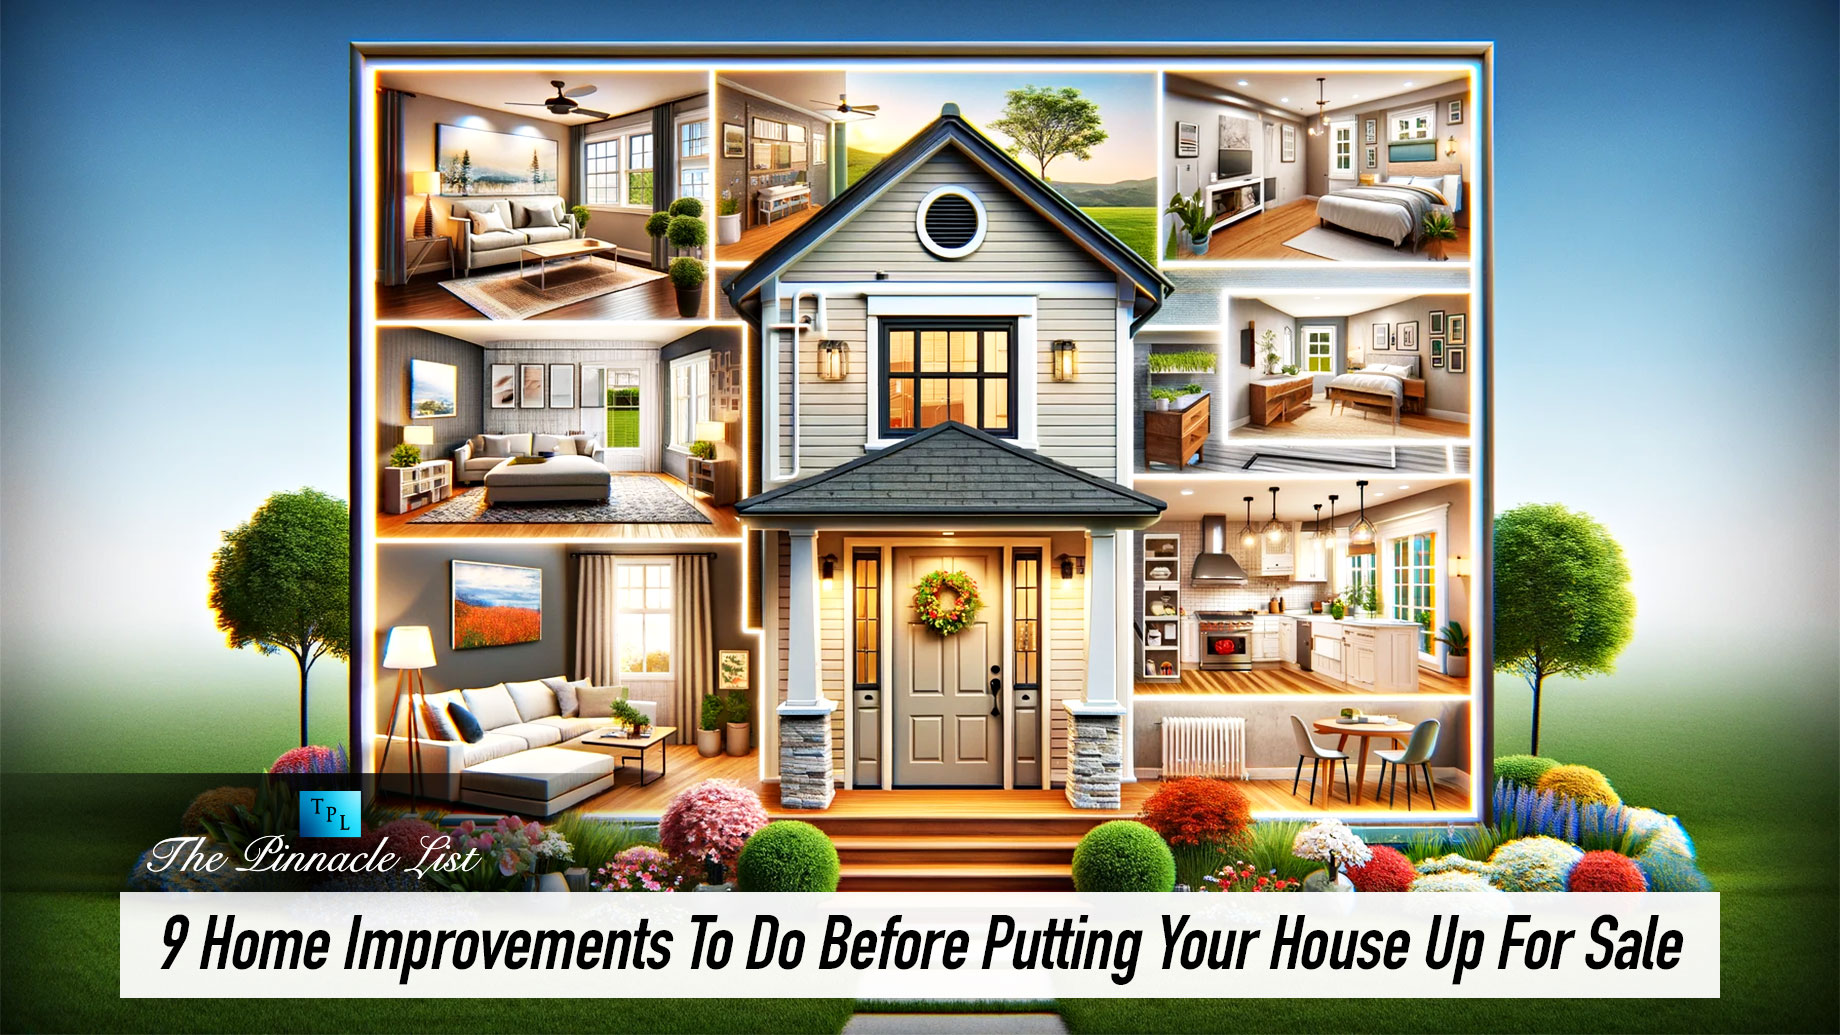 9 Home Improvements To Do Before Putting Your House Up For Sale